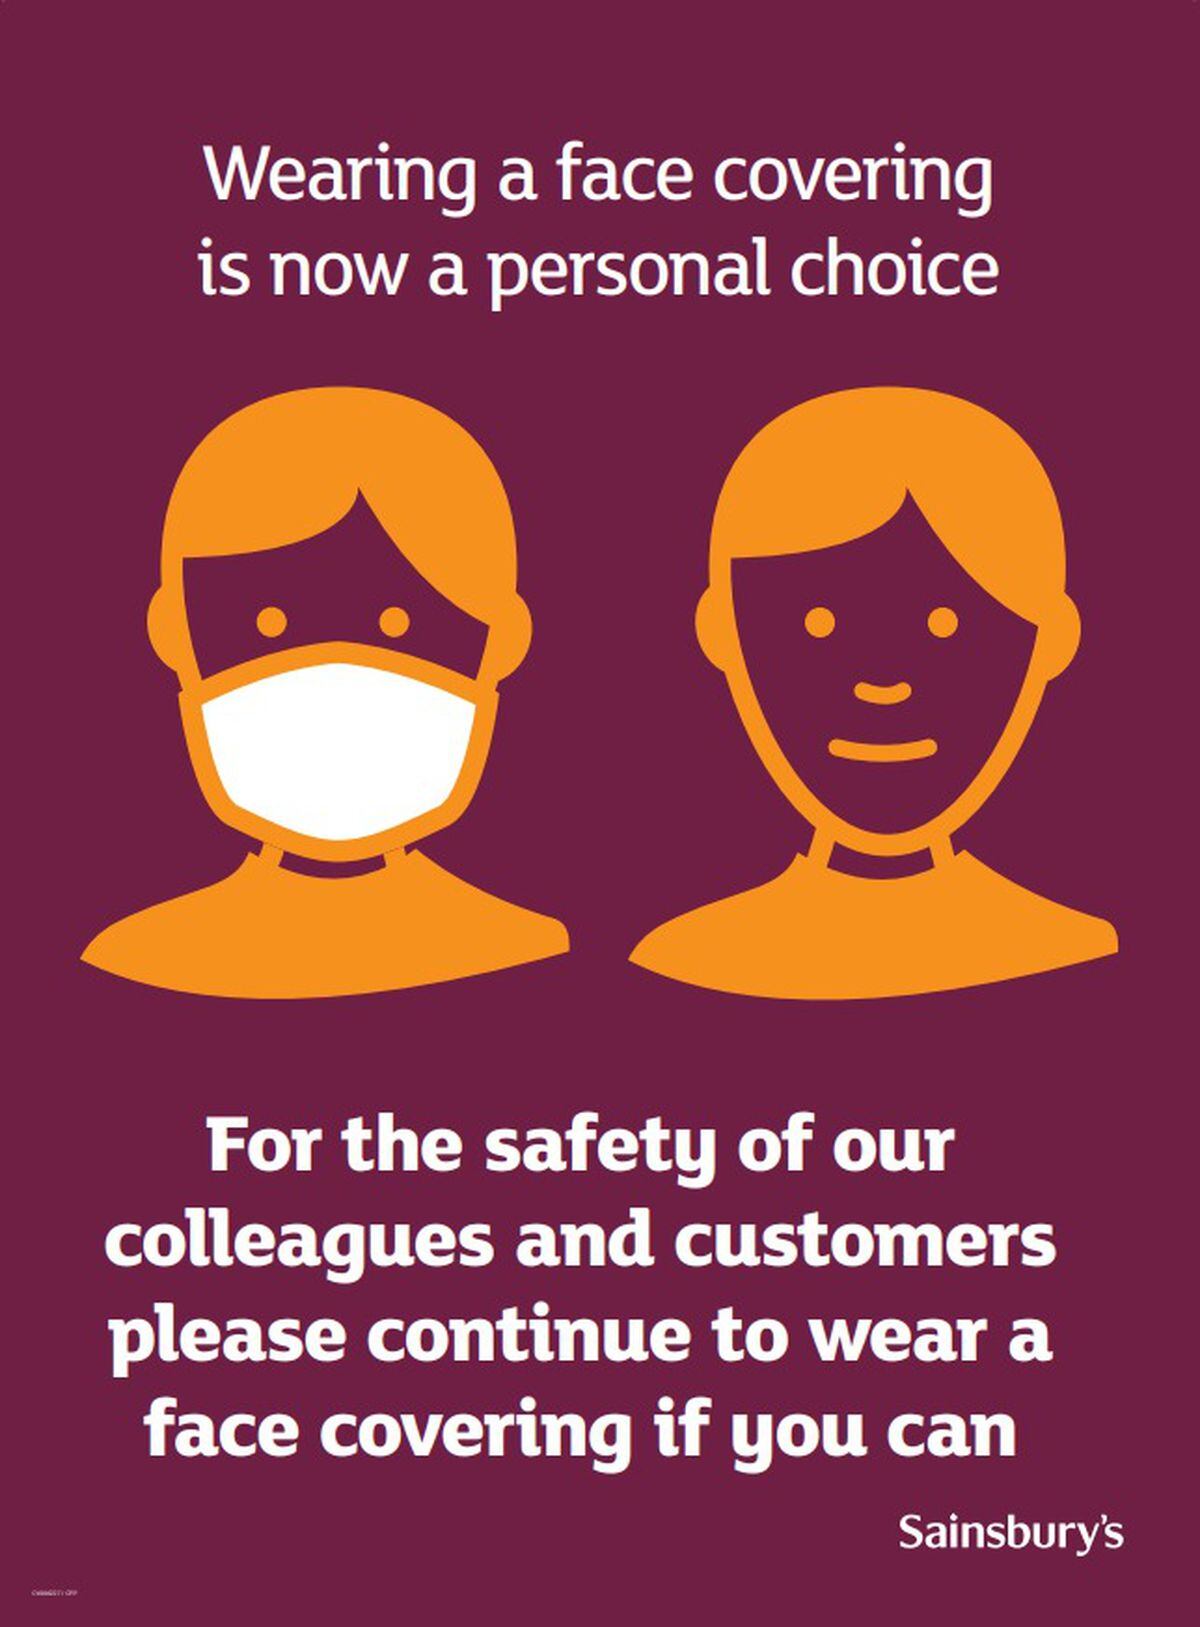 Sainsbury's wants customers to continue to wear masks